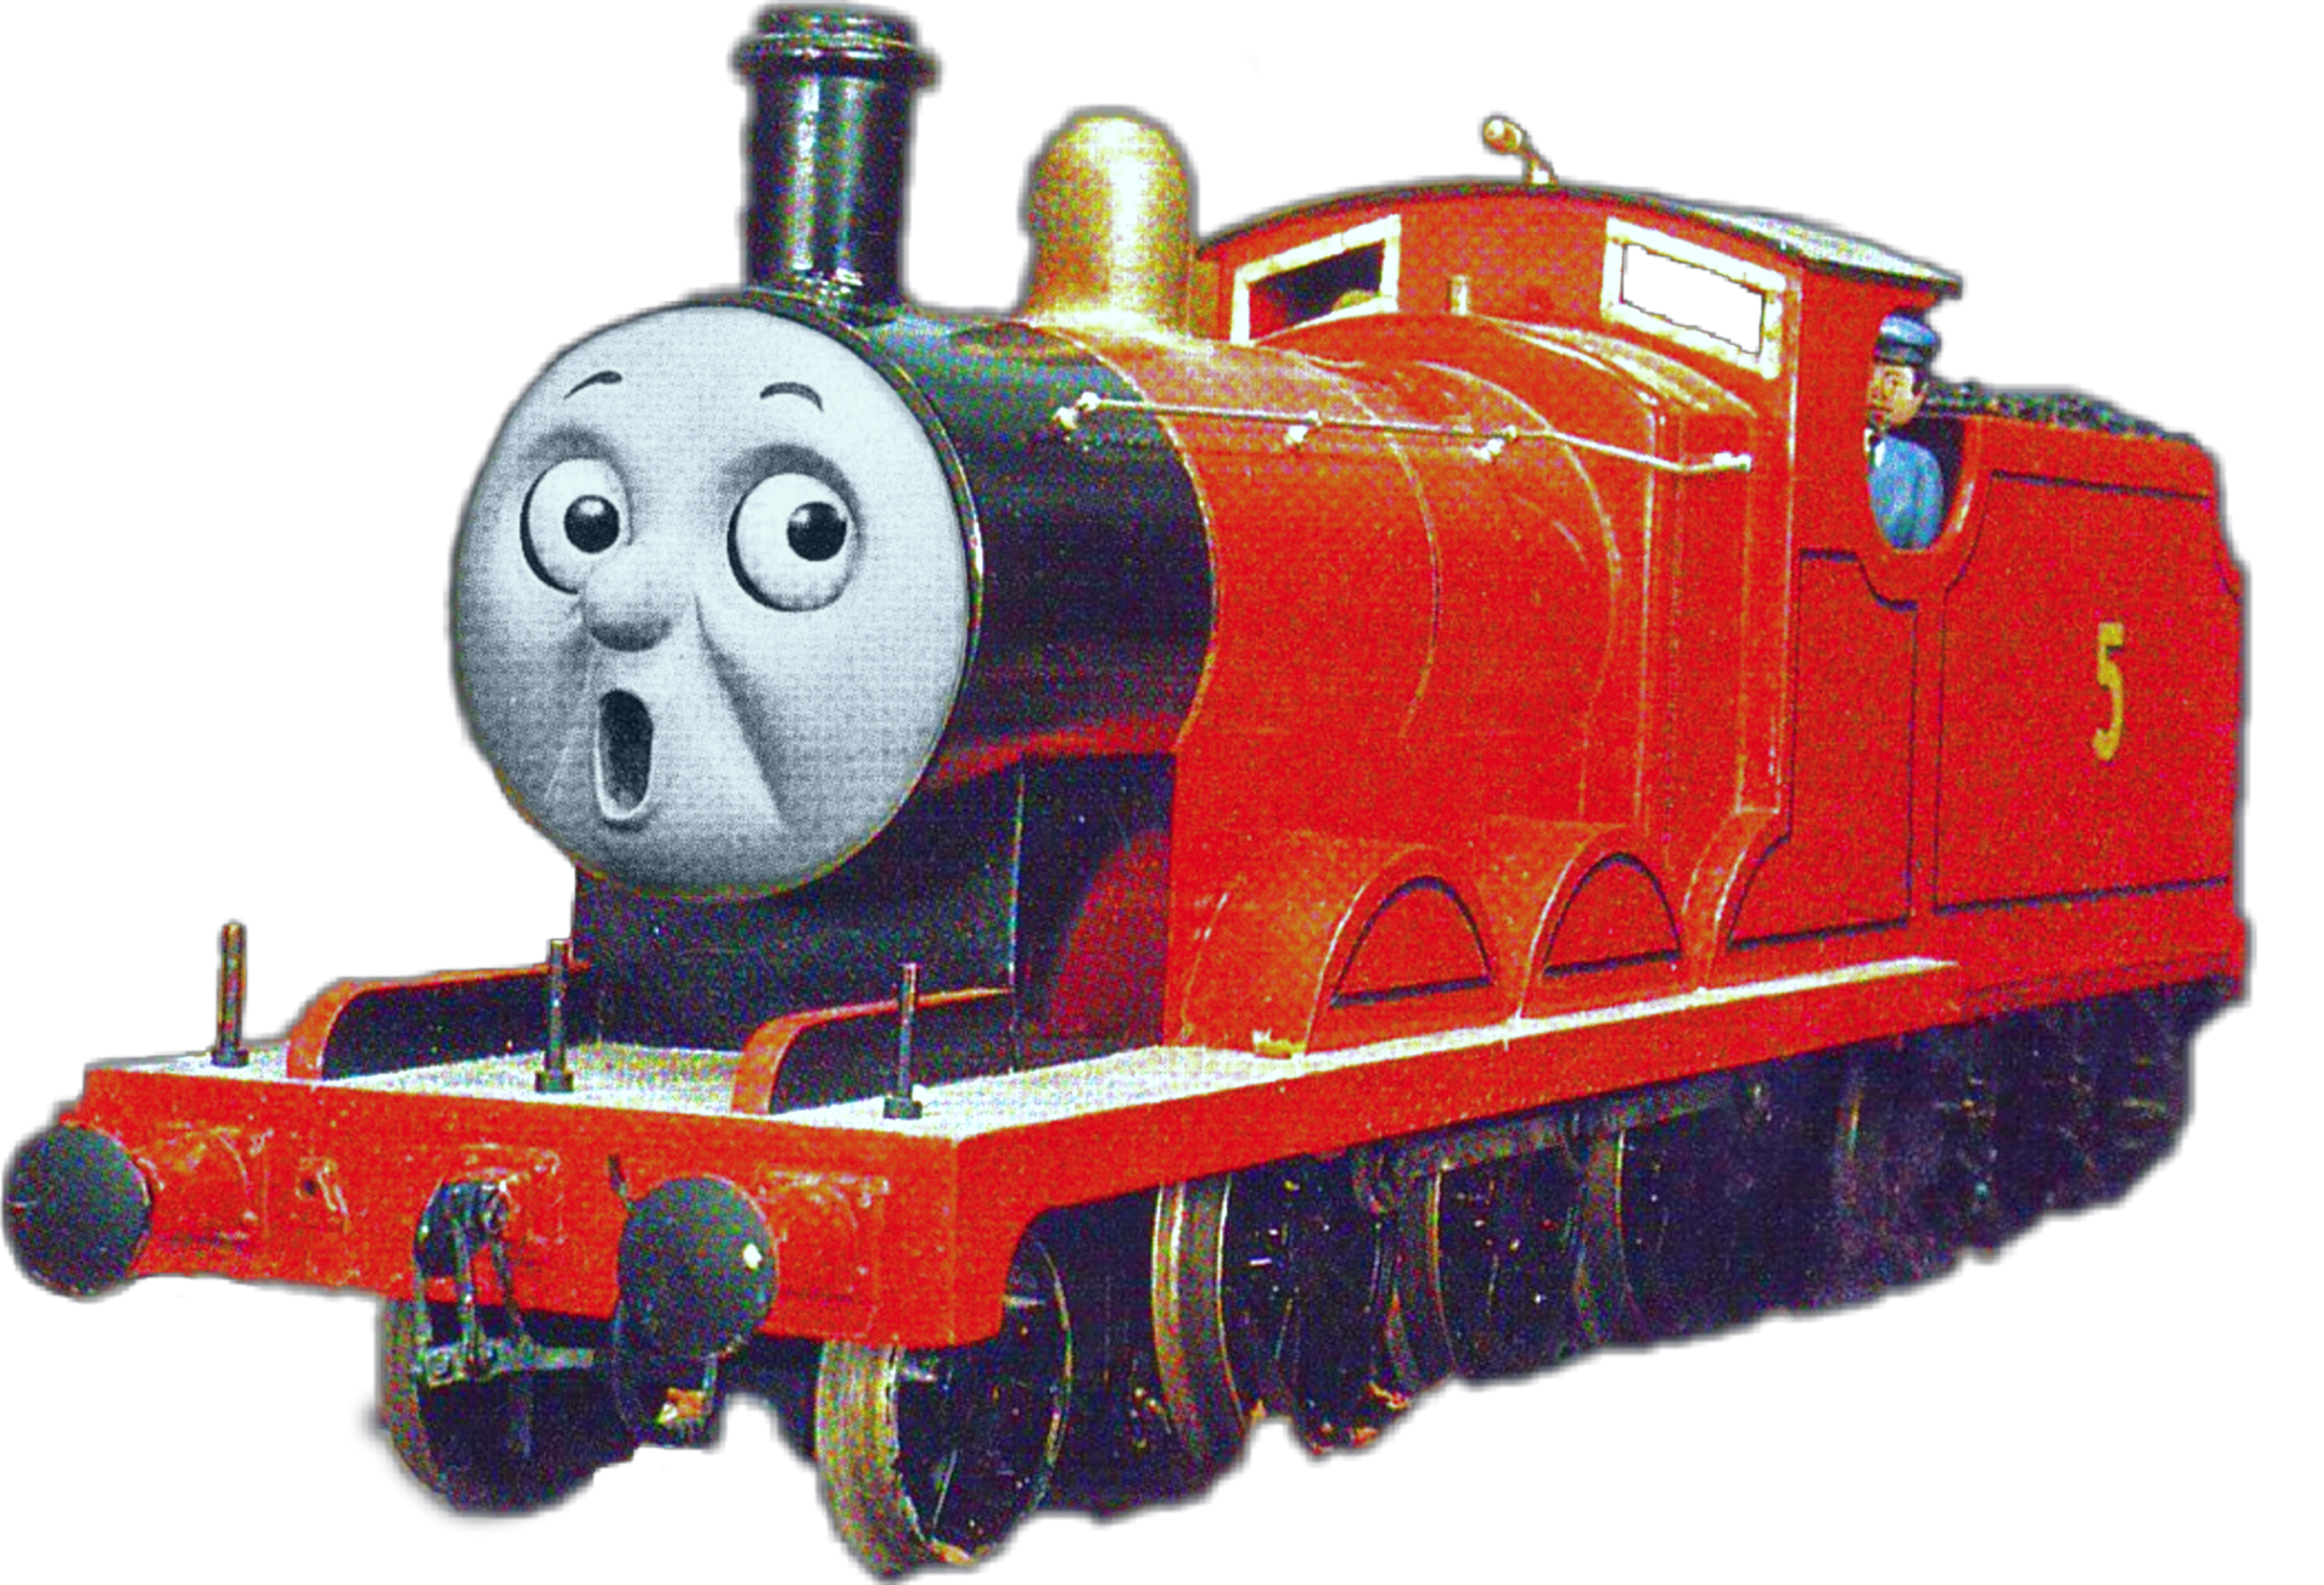 James from Thomas the Tank Engine Free Vector 88764 Vector Art at Vecteezy